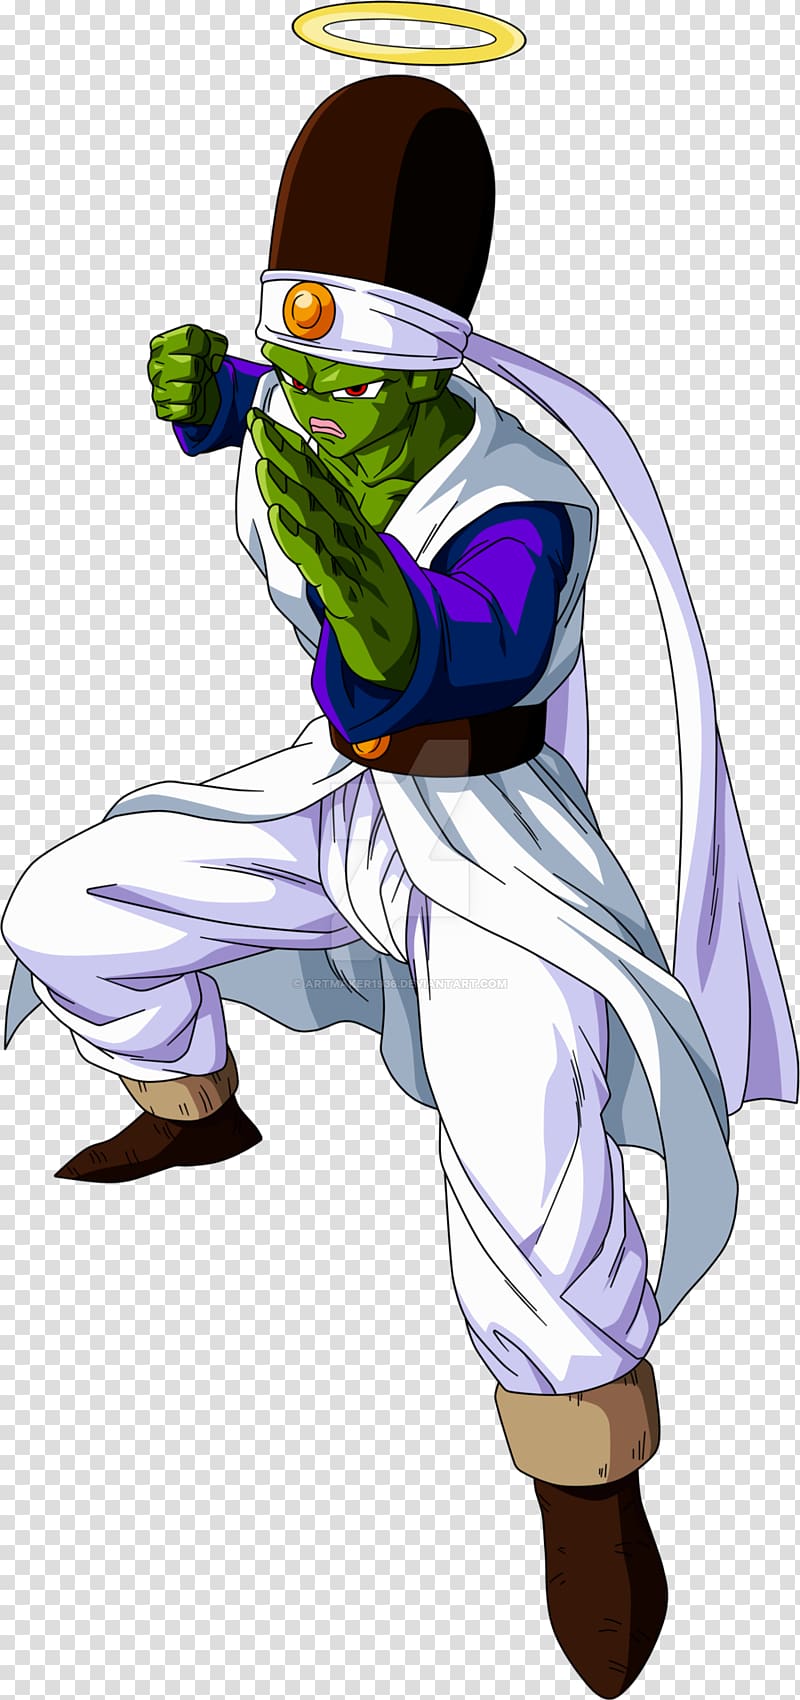 Pikkon Piccolo Goku Frieza Dragon Ball Heroes, dragon ball Android transparent background PNG clipart